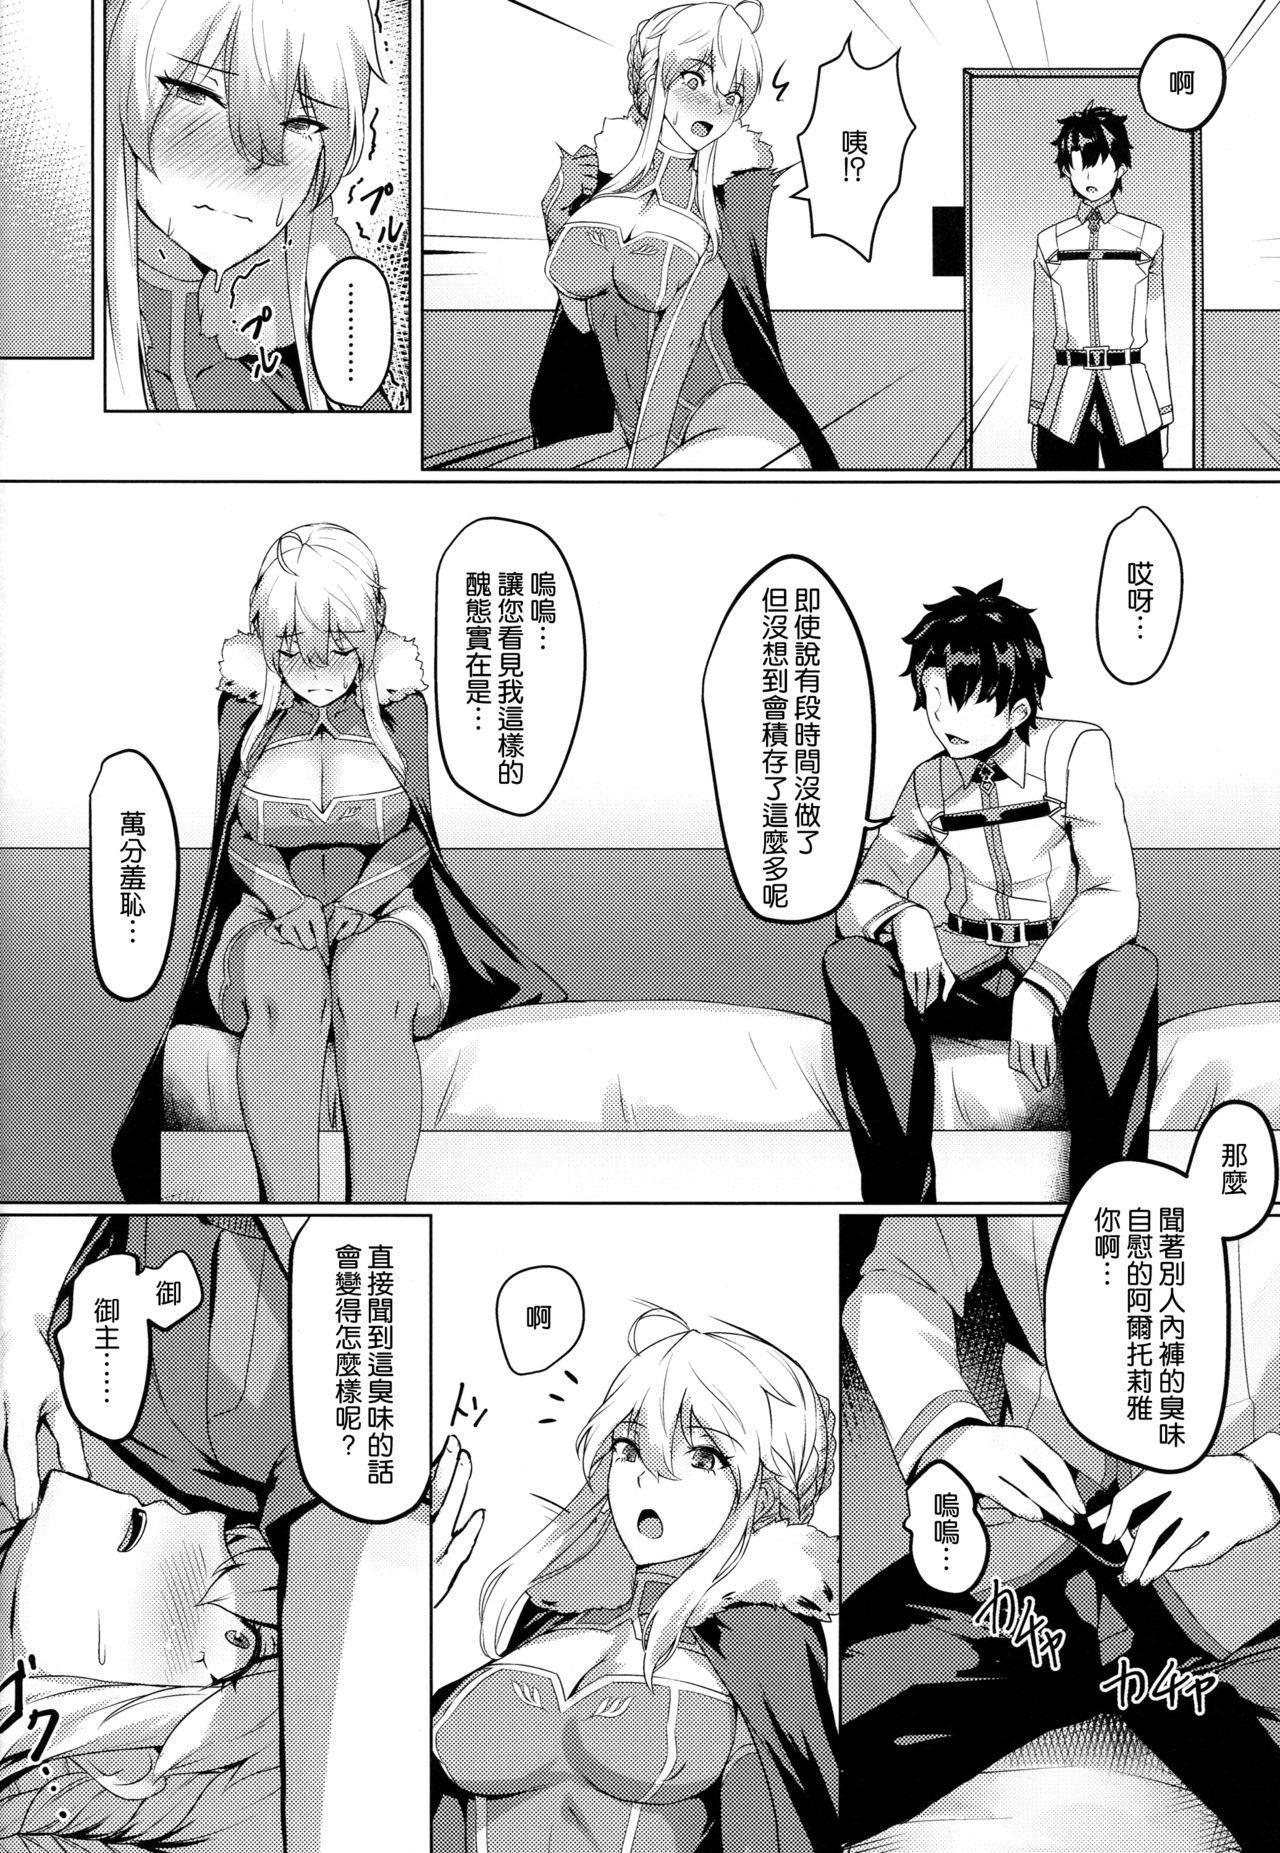 Oral Porn Like Attracts Like - Fate grand order Submission - Page 6